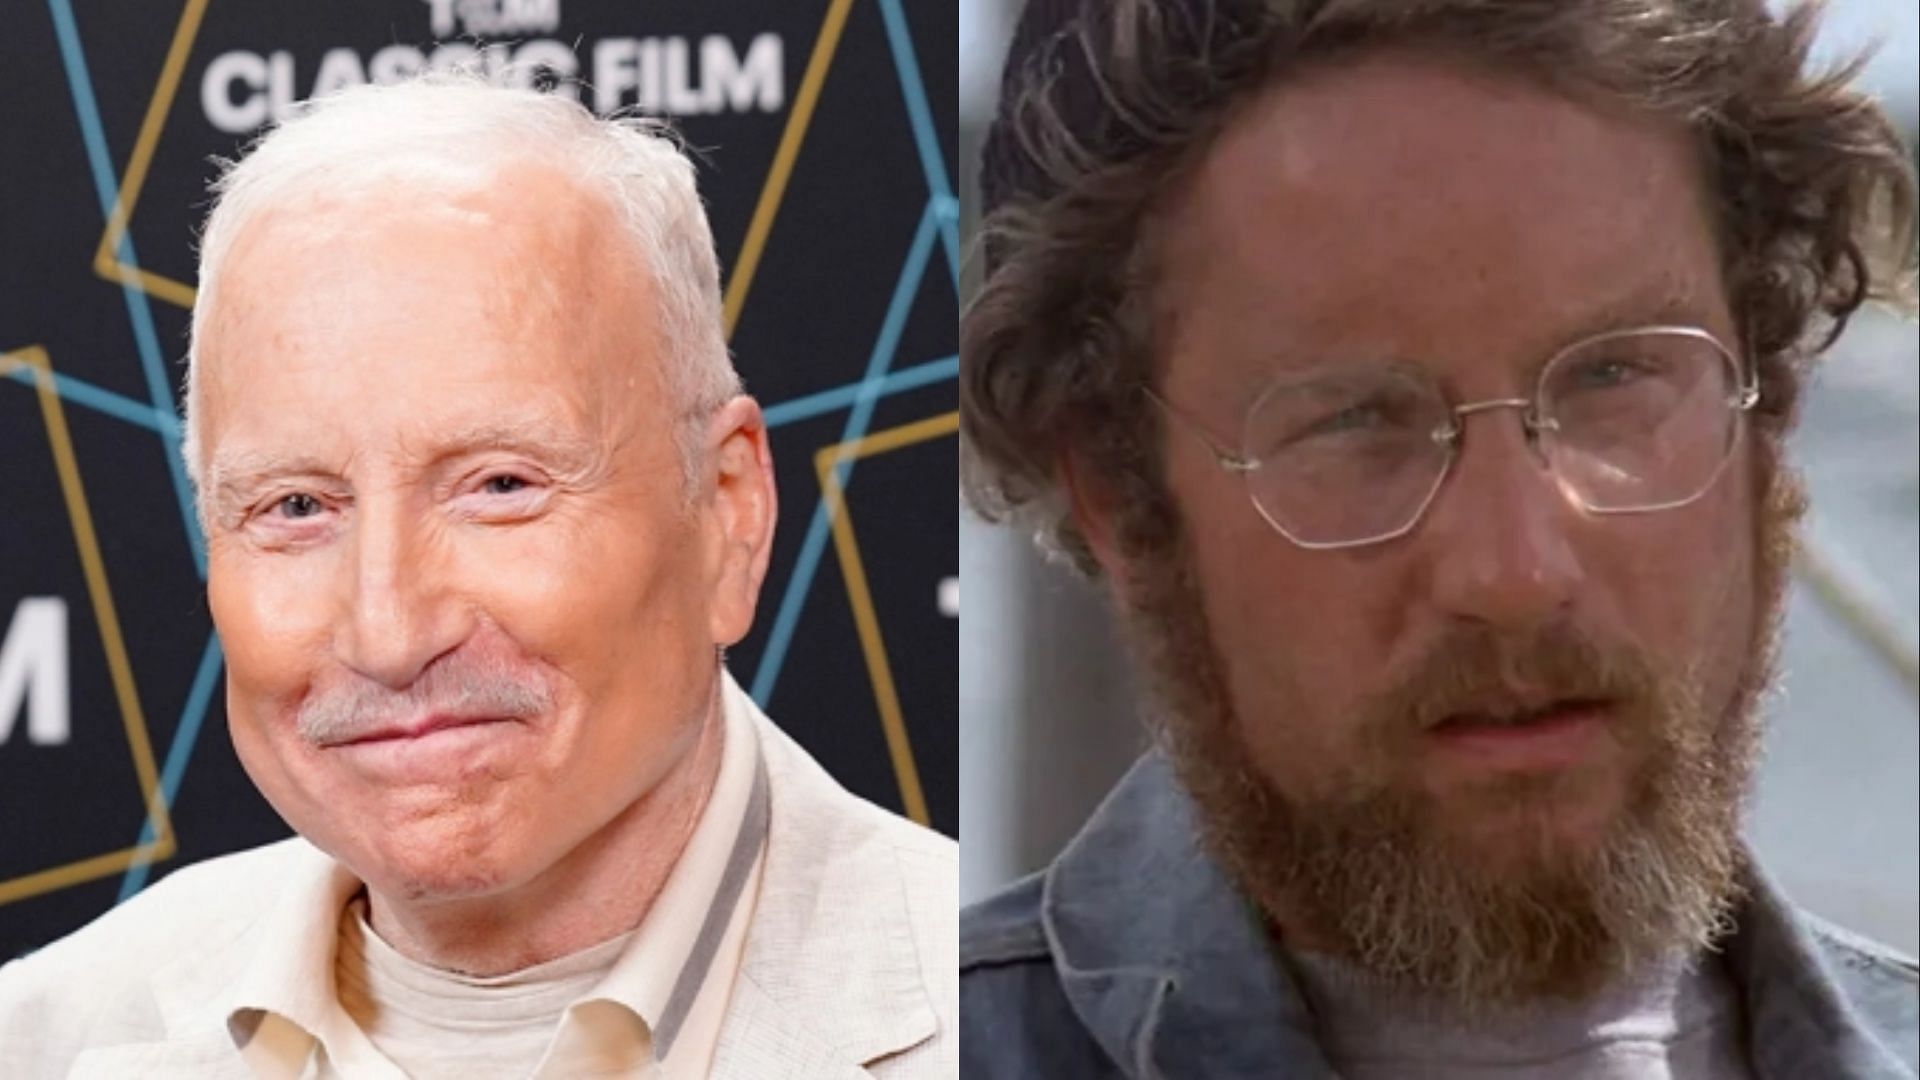 Richard Dreyfuss comes under fire for passing controversial remarks about Oscars